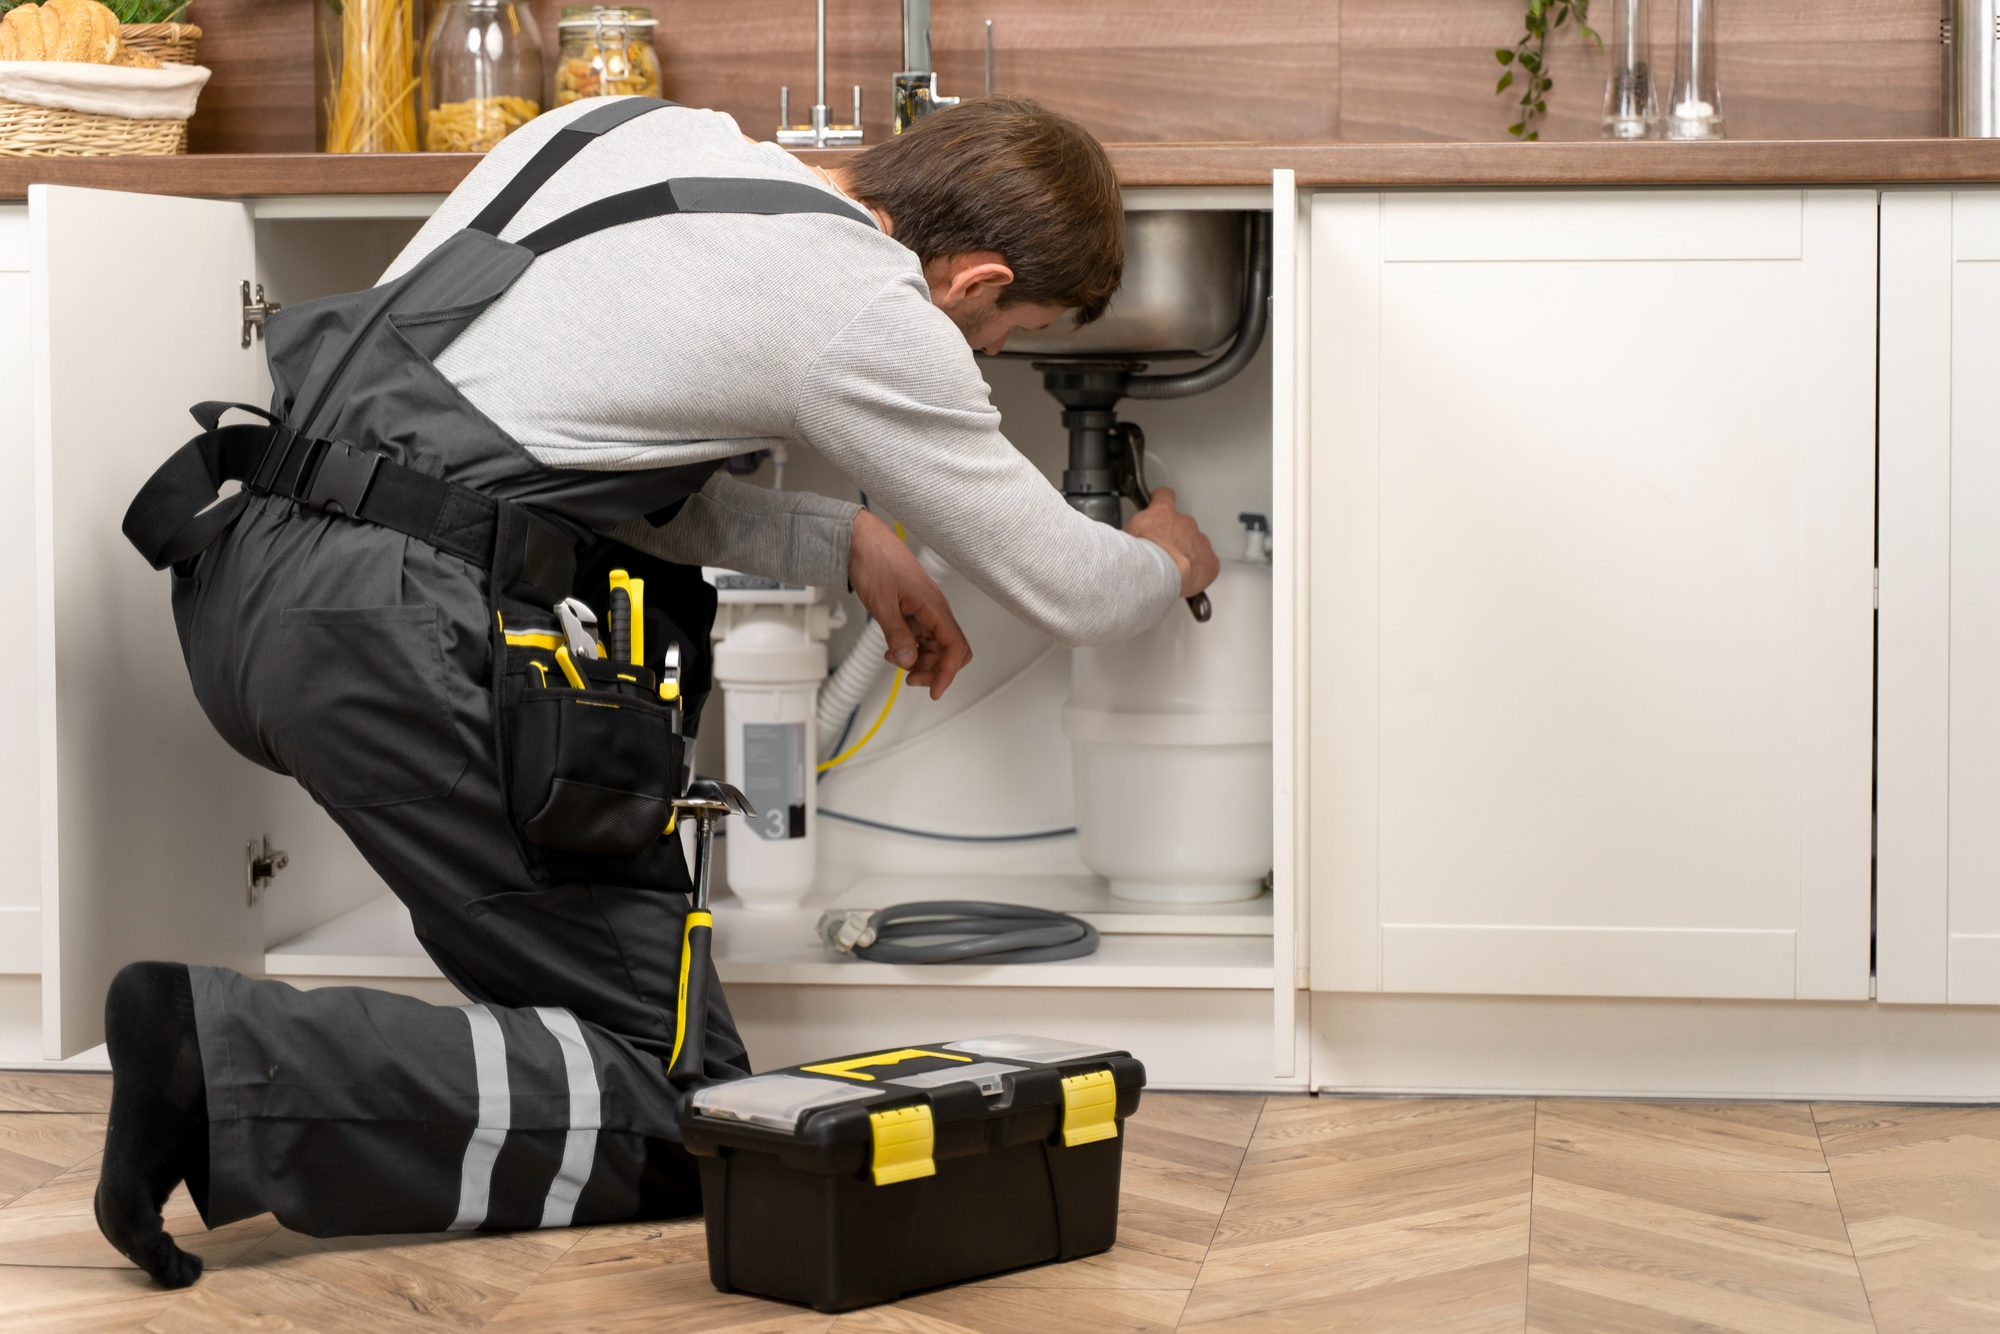 Affordable Plumbing Services For Burst Pipes And Leaks In London